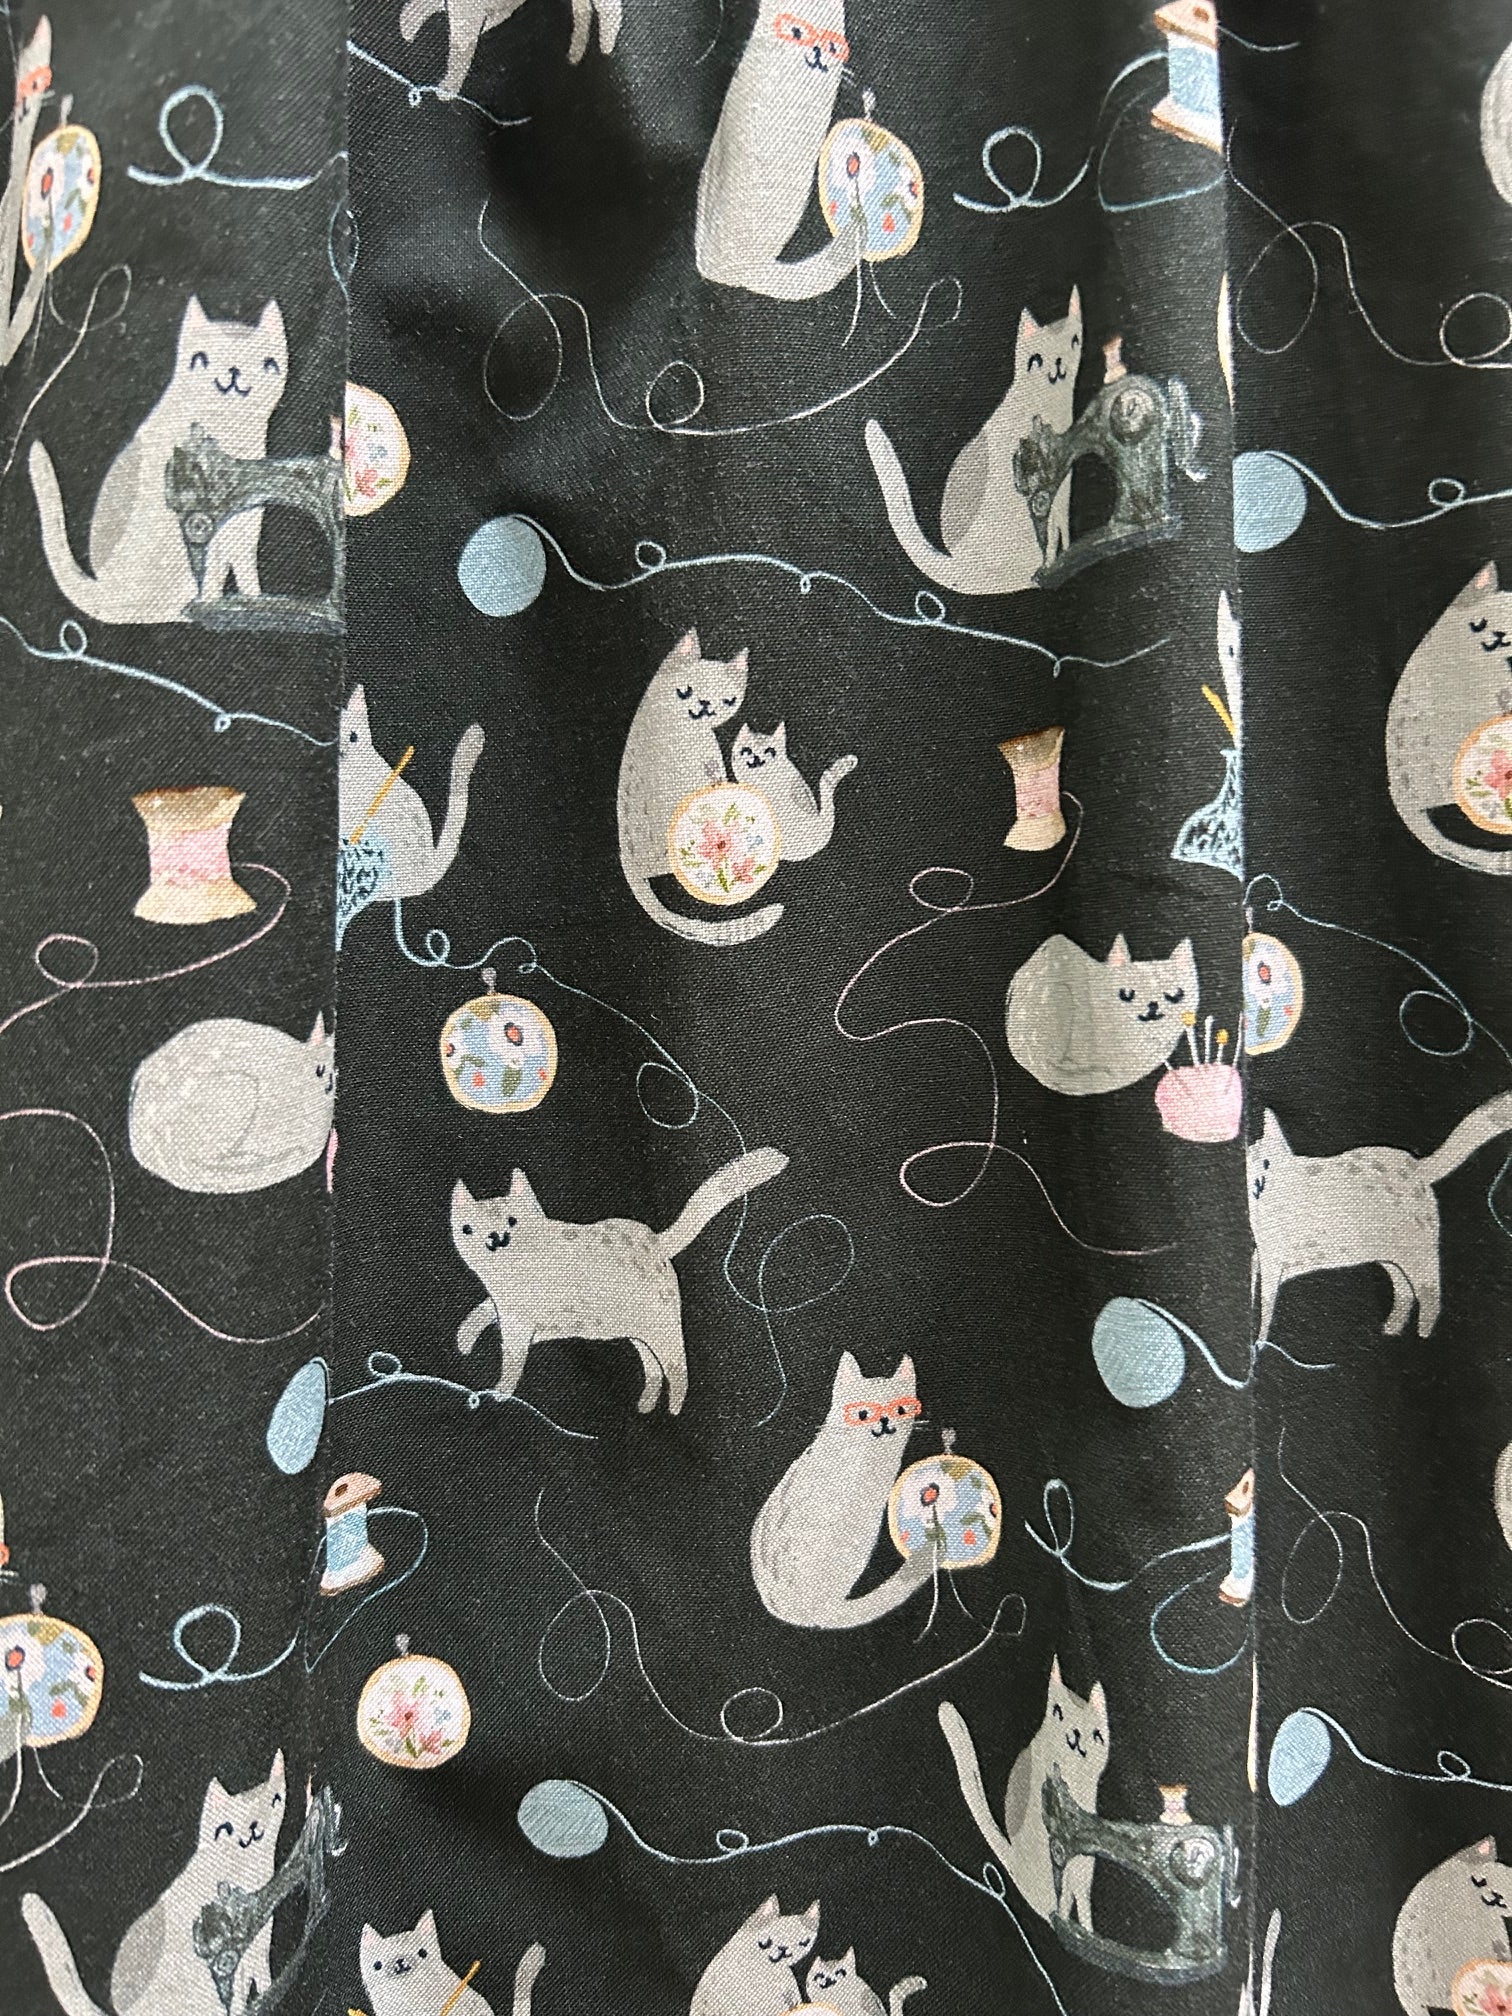 close up of fabric showing cats and thread and yarn on dark navy background